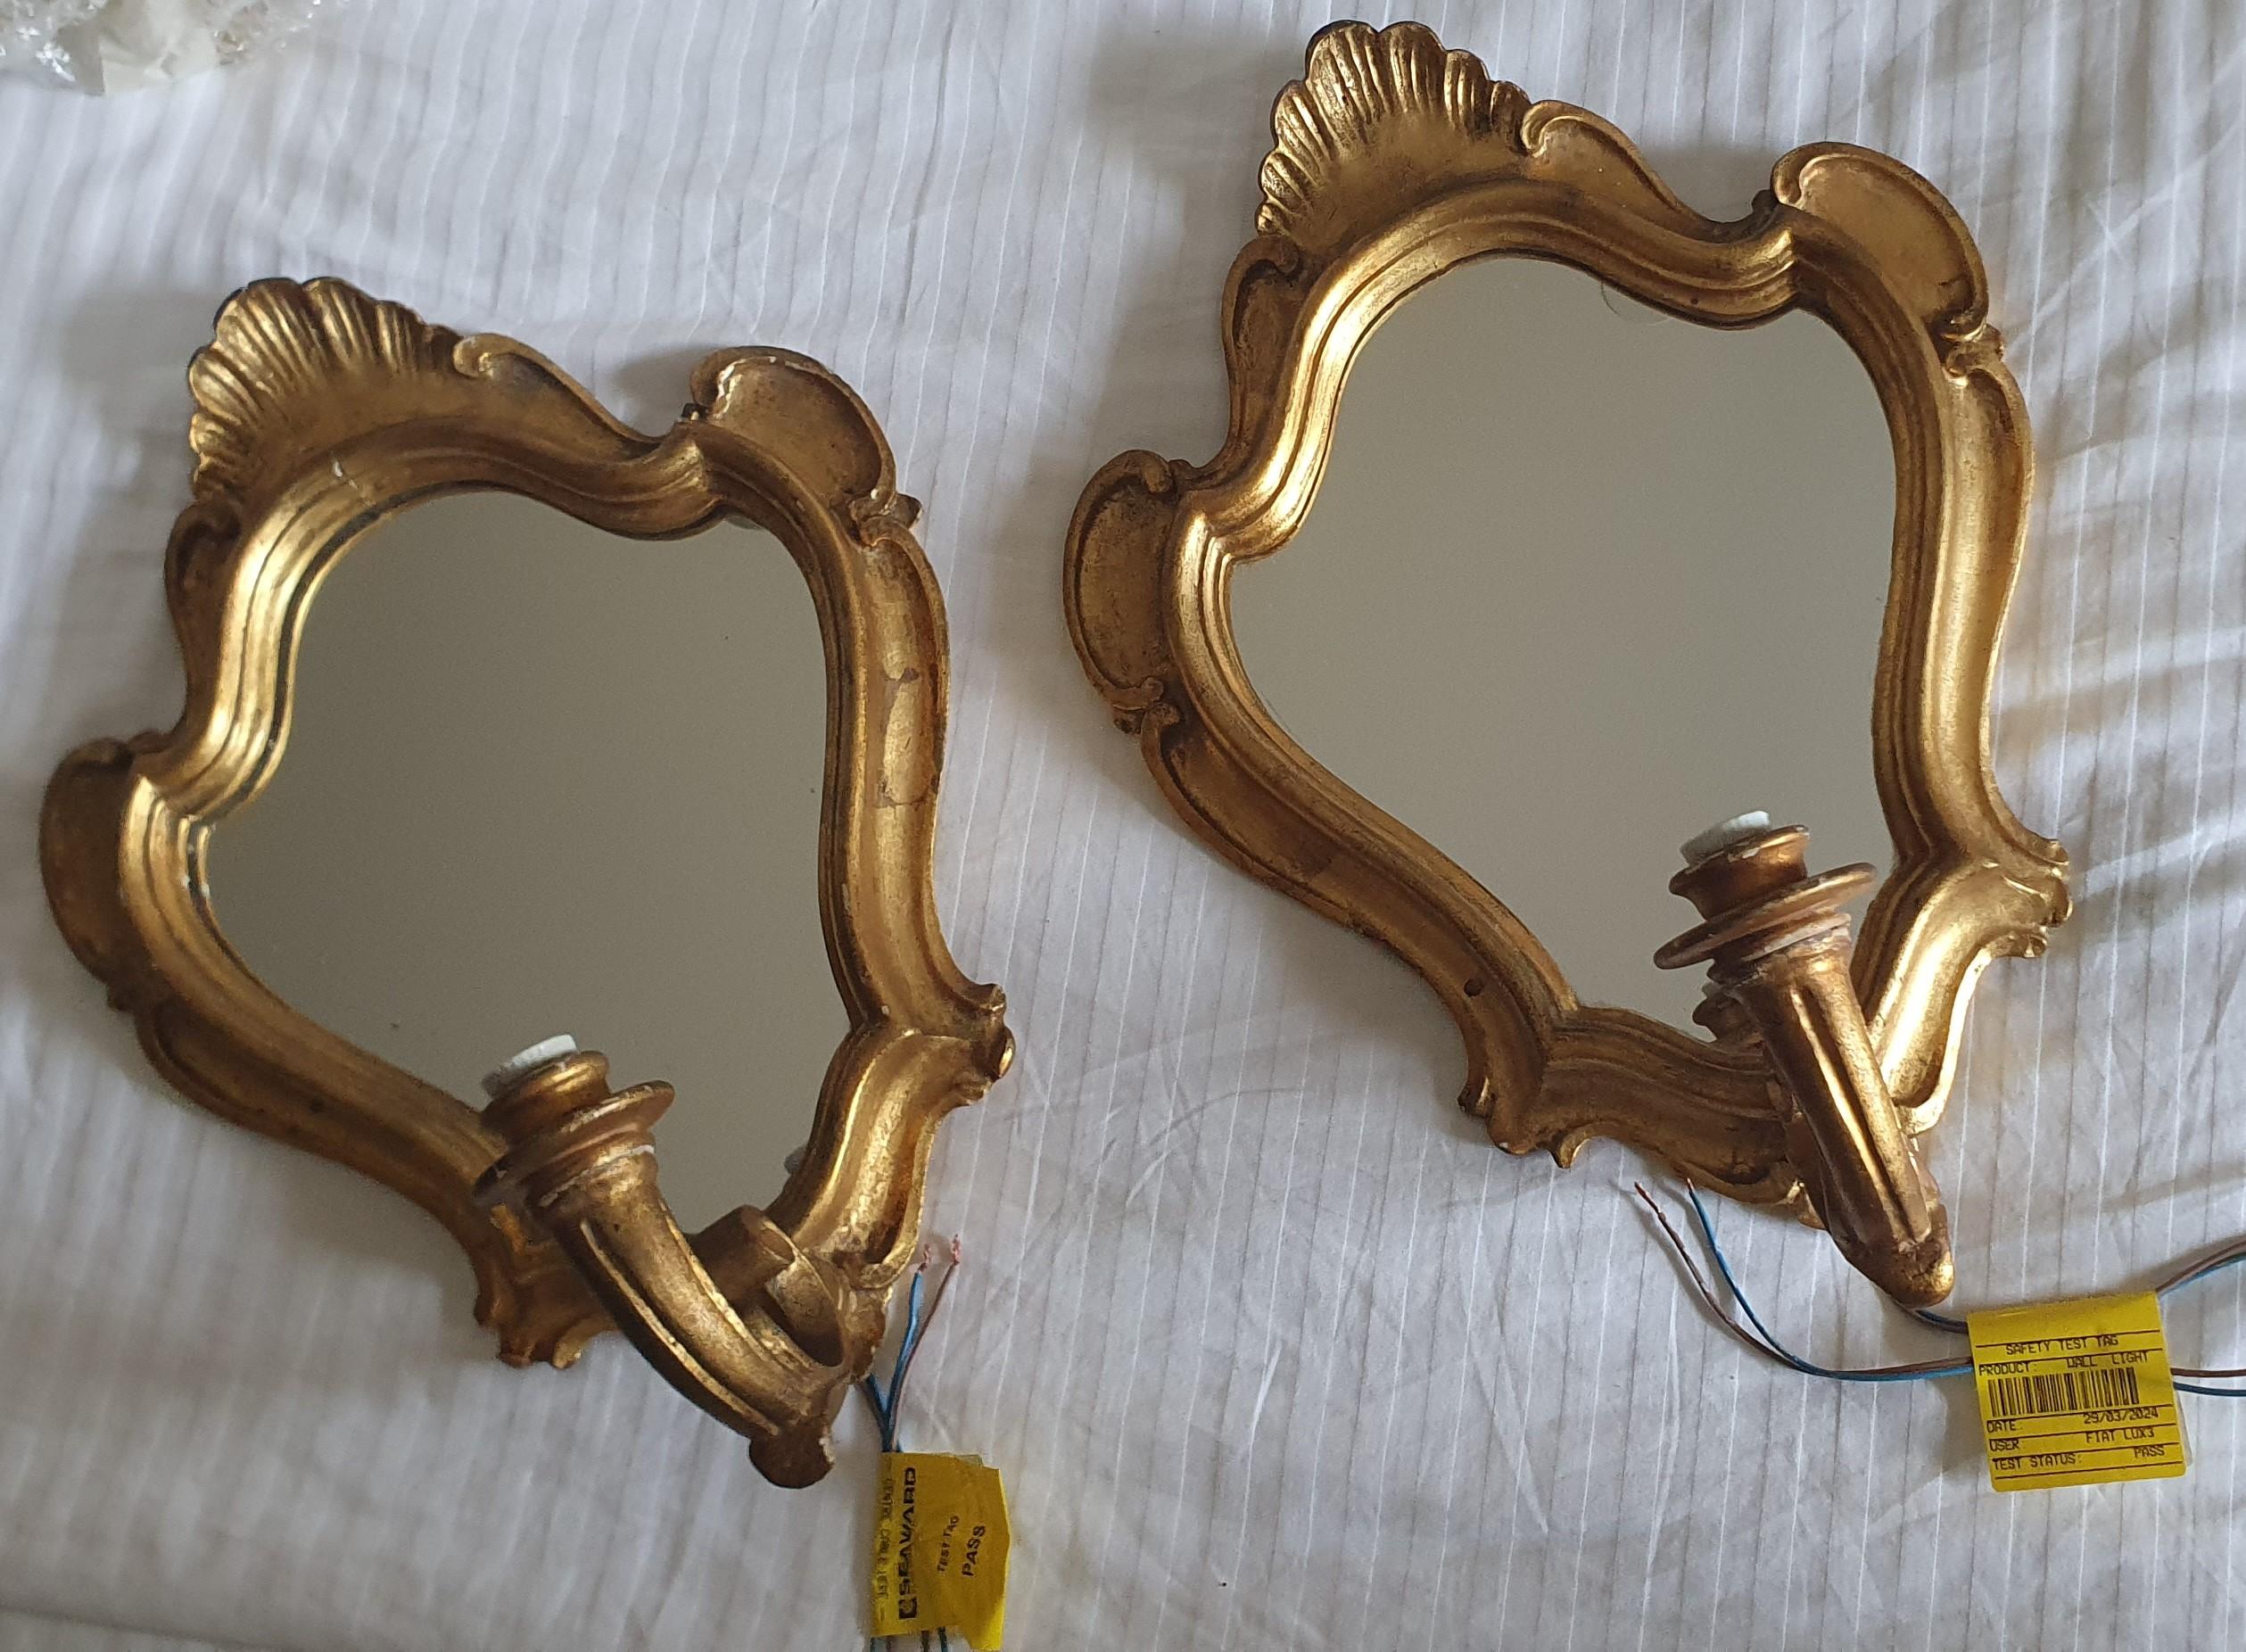 We are presenting for sales a stunning pair of Italian 1940s hand carved, oil gilded mirror Girandole wall sconces in the Baroque style. 

These beautiful deep carved sconces have a 3cm Deep frame, 2cm internal depth from frame to mirror